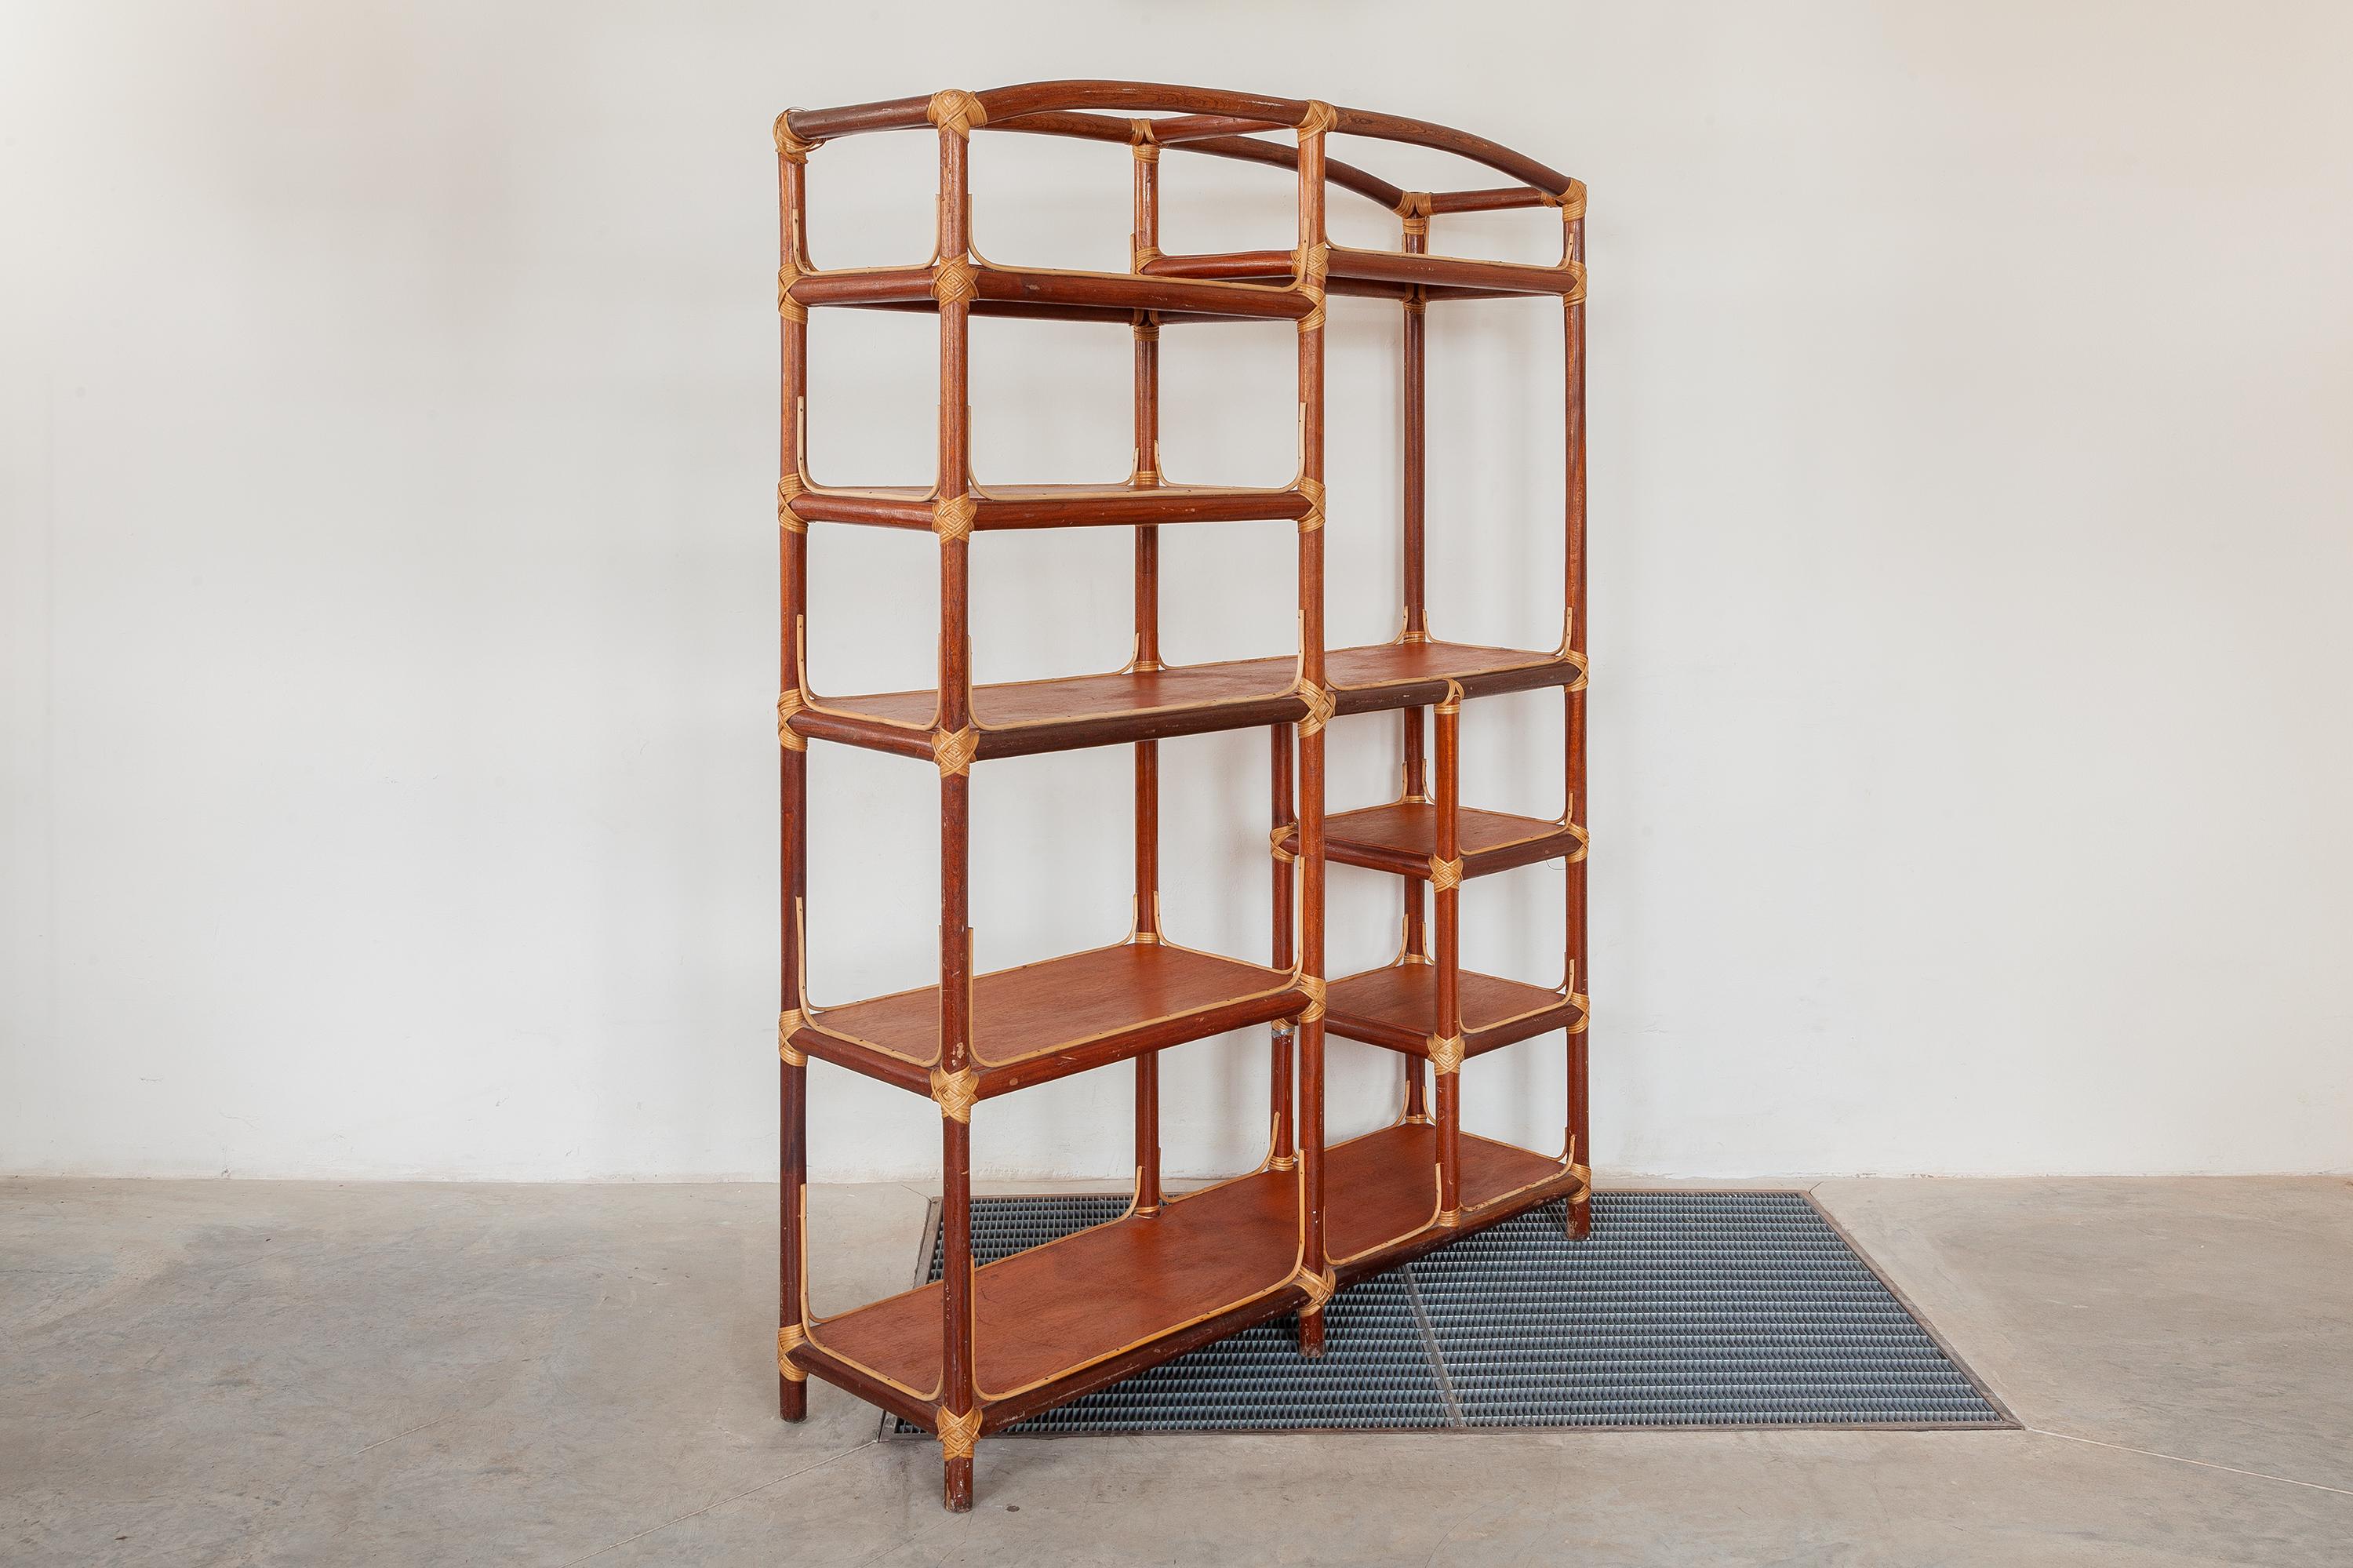 Vintage midcentury display shelf. Teak shelves are woven onto a sturdy bent bamboo frame. This Bamboo bookshelf is a great piece of bamboo furniture makes a great boho chic vintage look. Made in Italy, 1970s. Dimensions: 138 W x 185 H x 38 D cm.